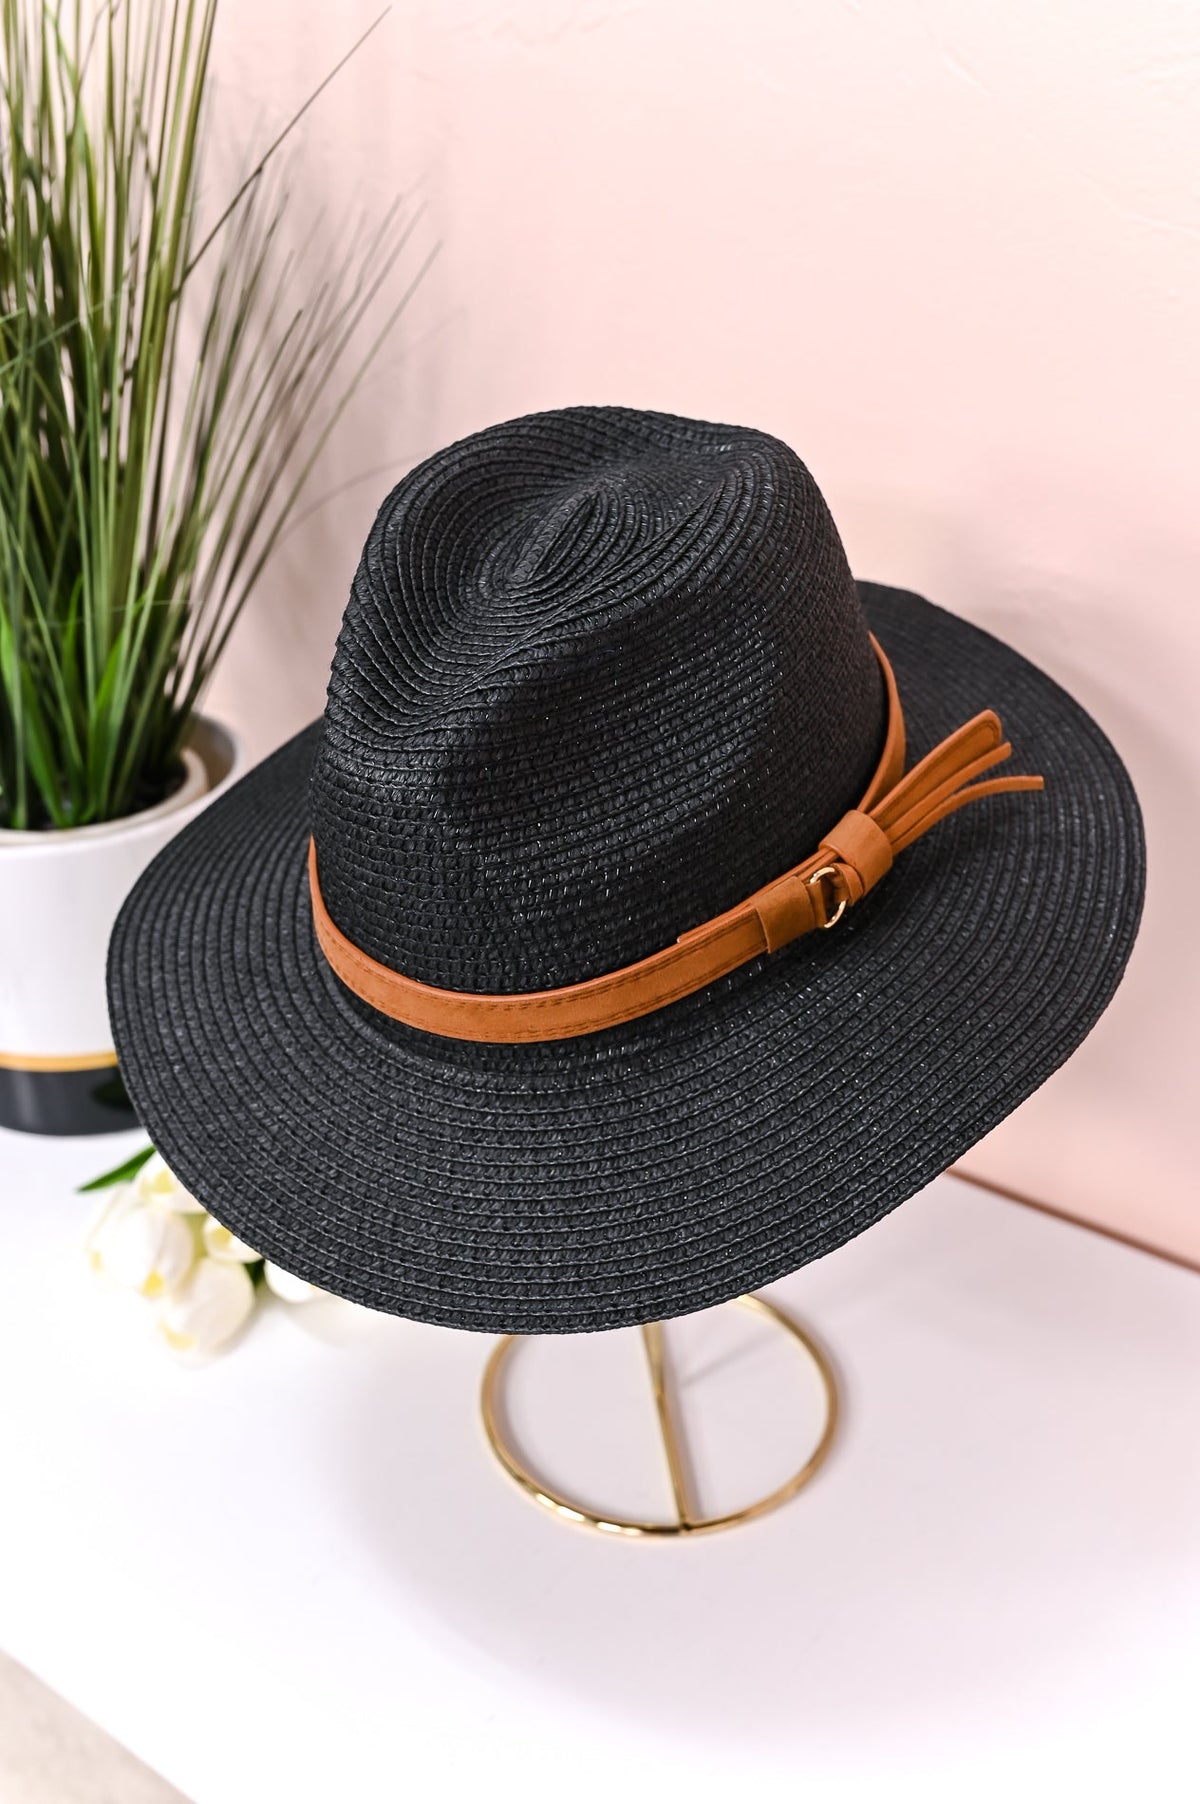 Black Fedora With Brown Band - HAT1401BK